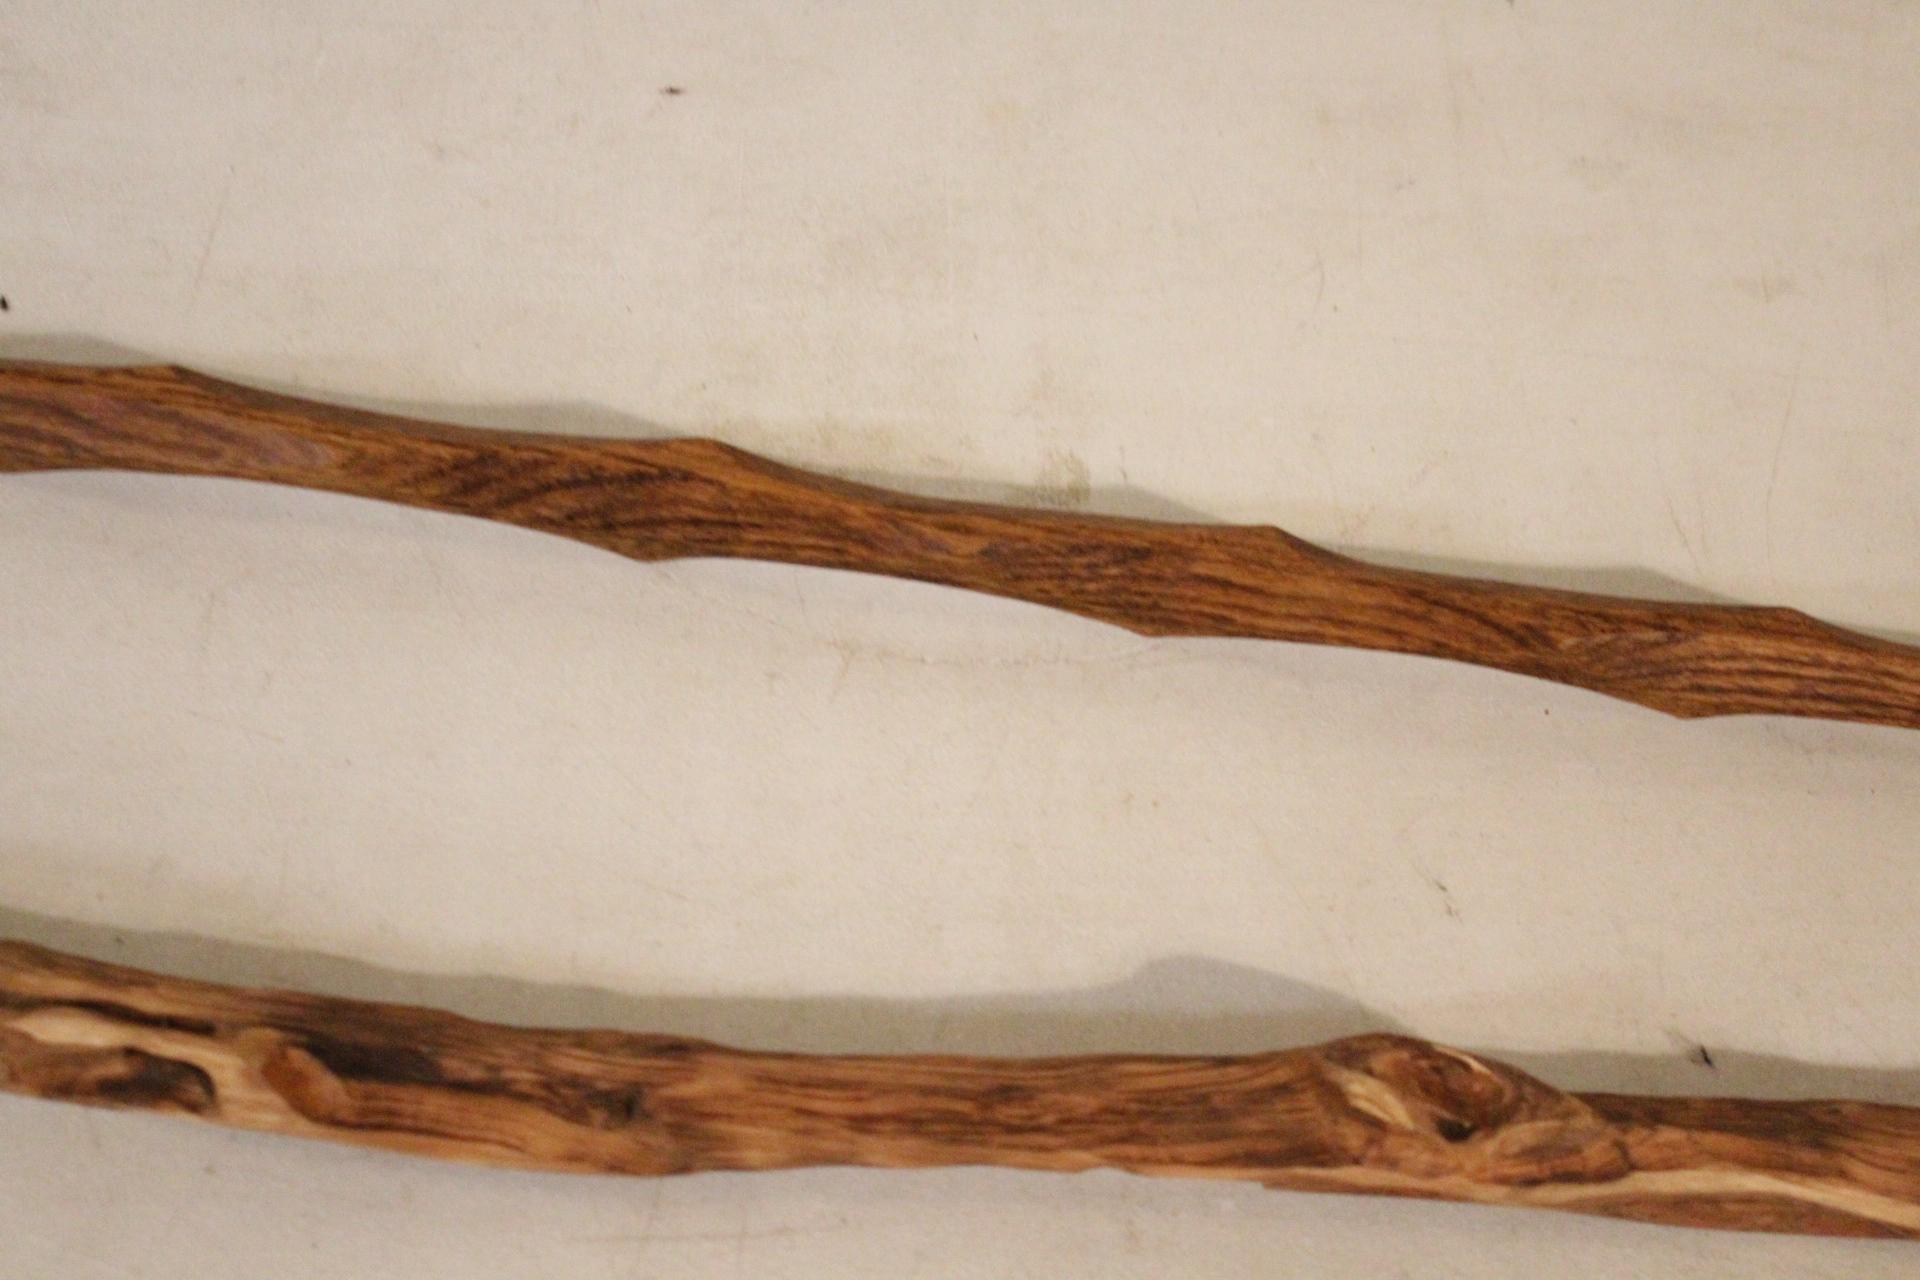 2 Walking Sticks One is Handcrafted Diamond Willow Measures 49" Tall Other